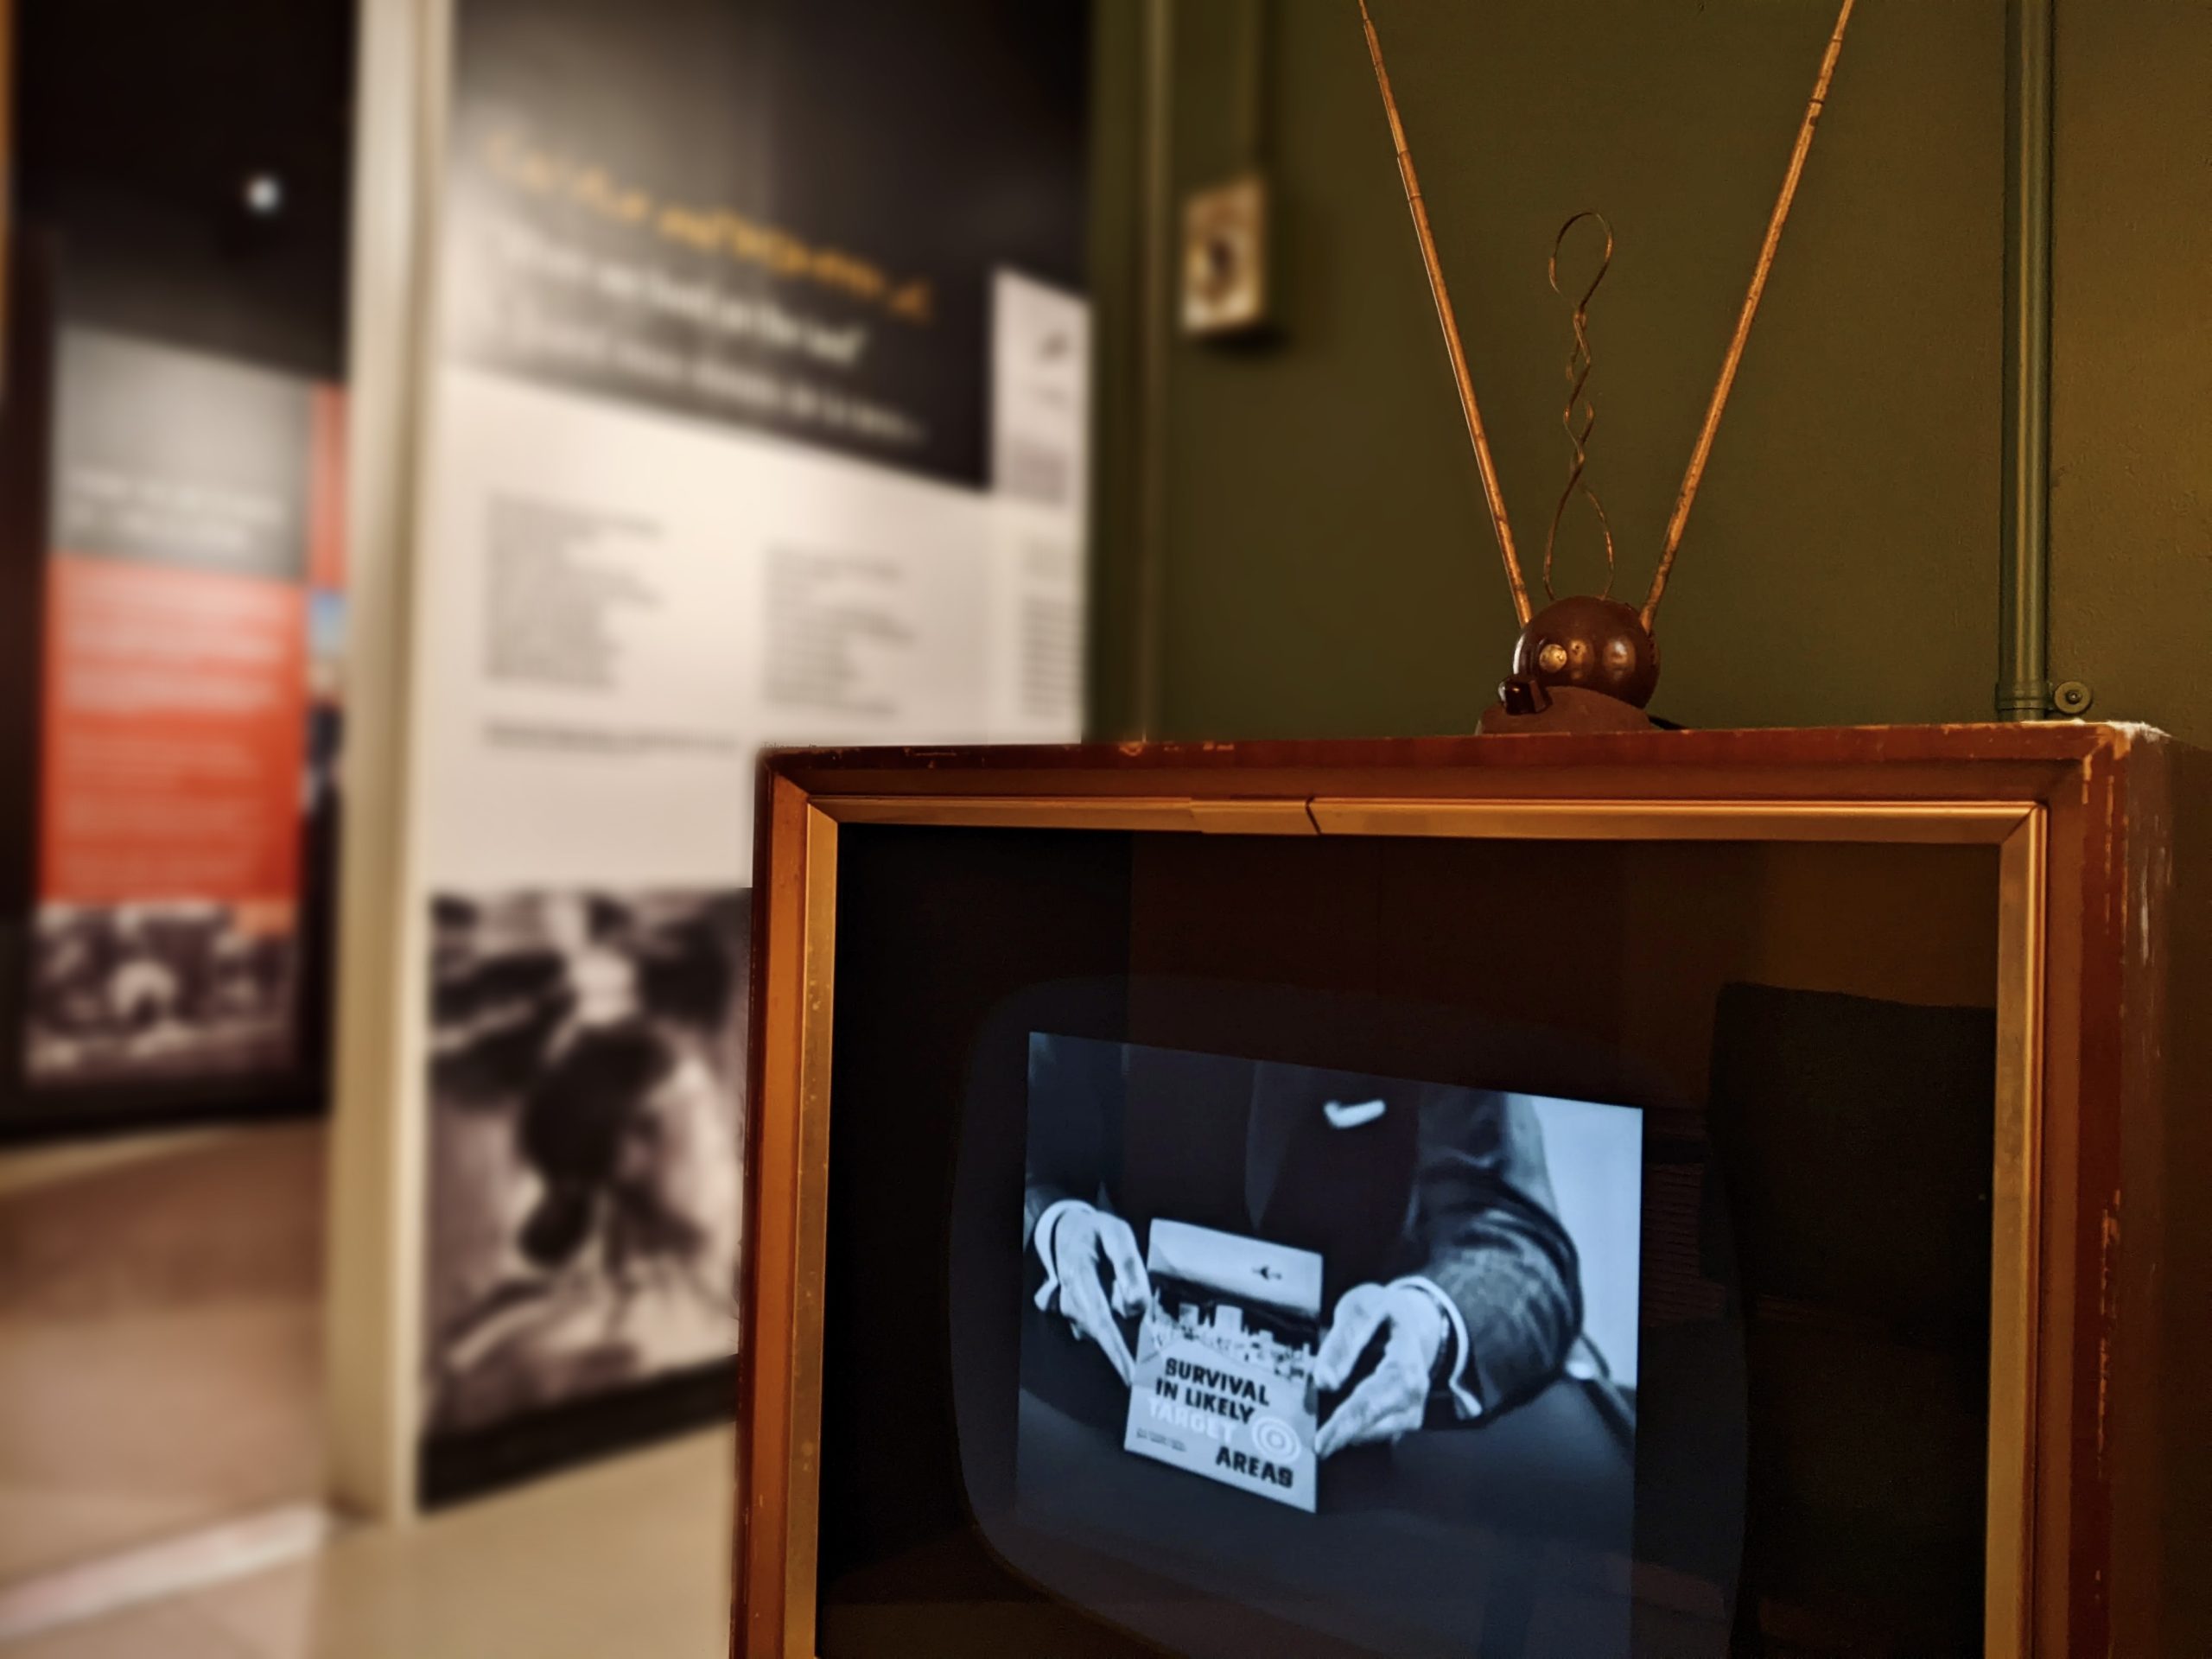 Television screen in "Canada and the Cold War" exhibition.